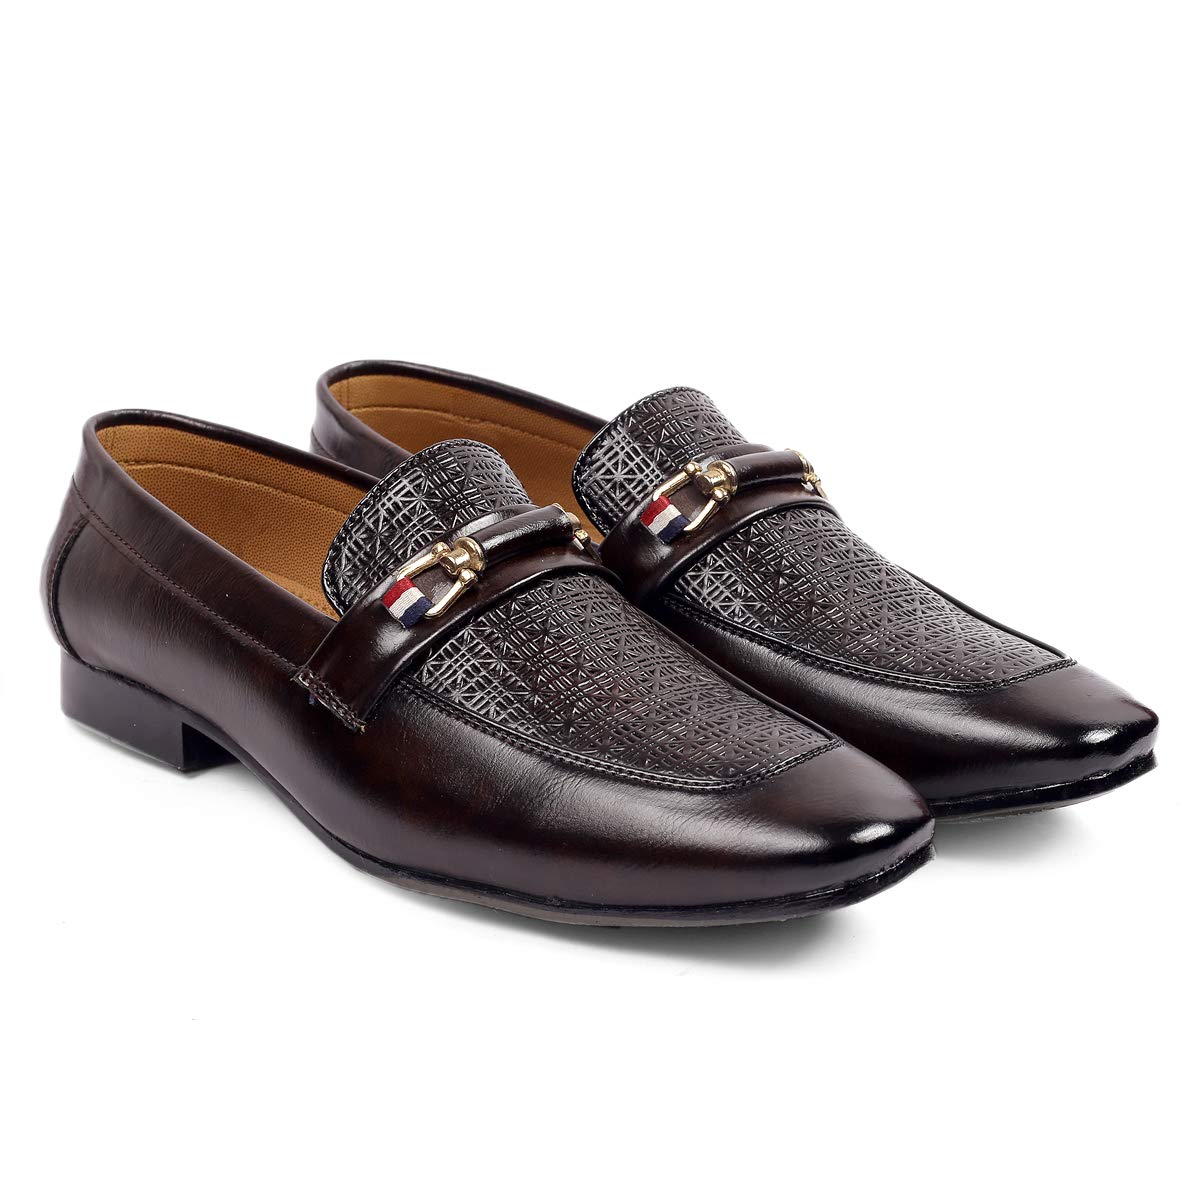 New Fashion Wedding And Party Wear Casual Moccasins Slip-on Shoes For Men's-JonasParamount